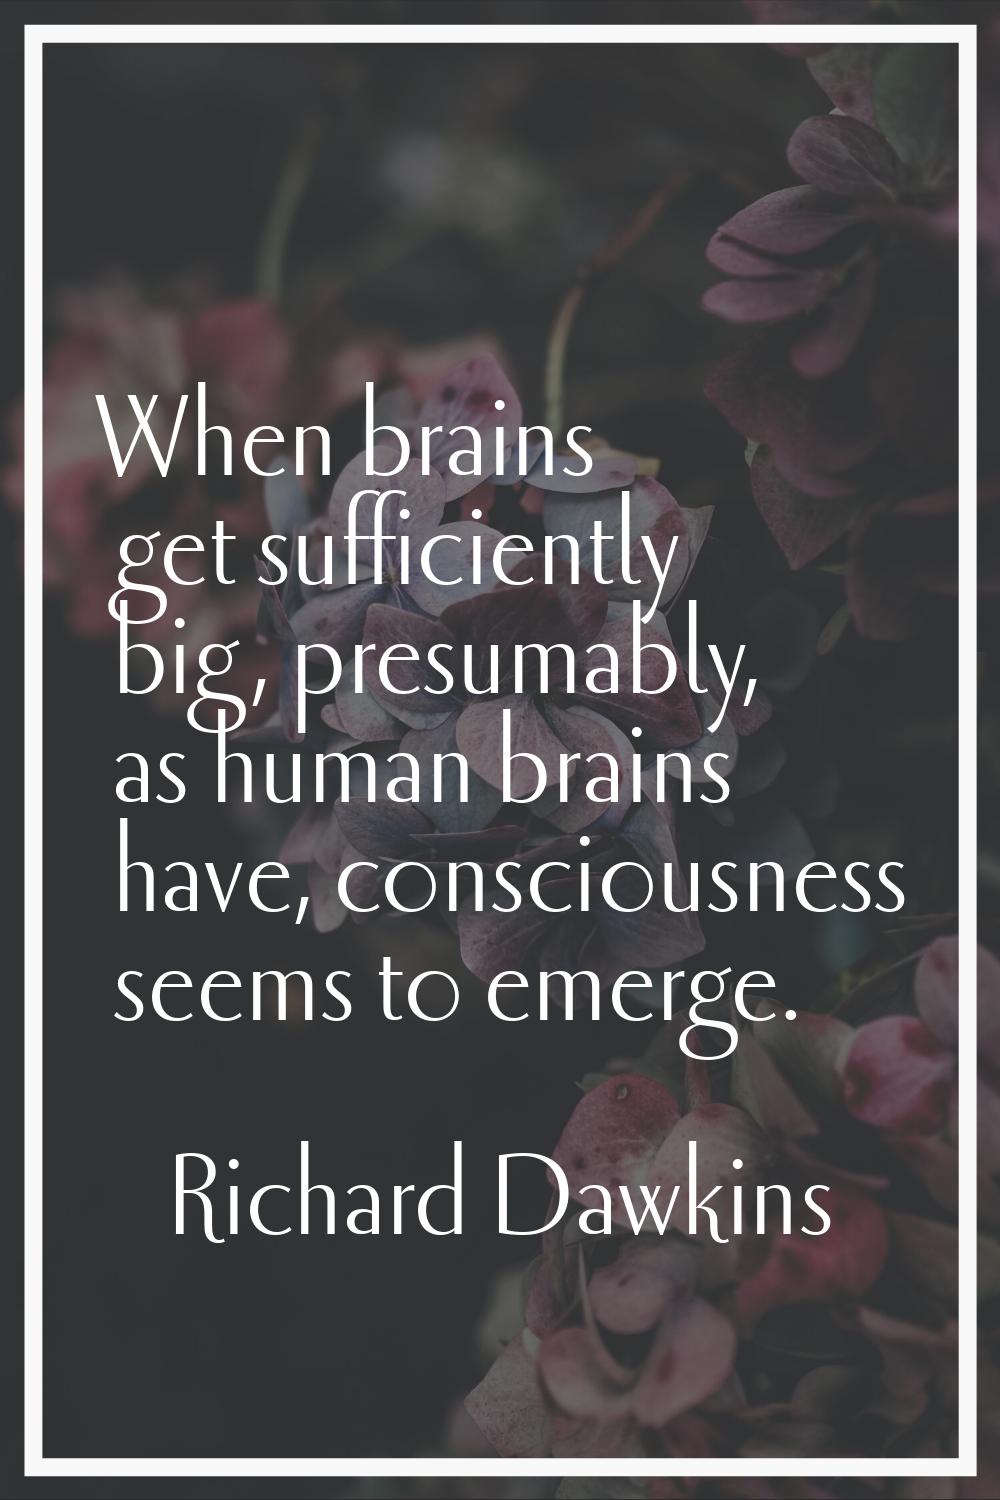 When brains get sufficiently big, presumably, as human brains have, consciousness seems to emerge.